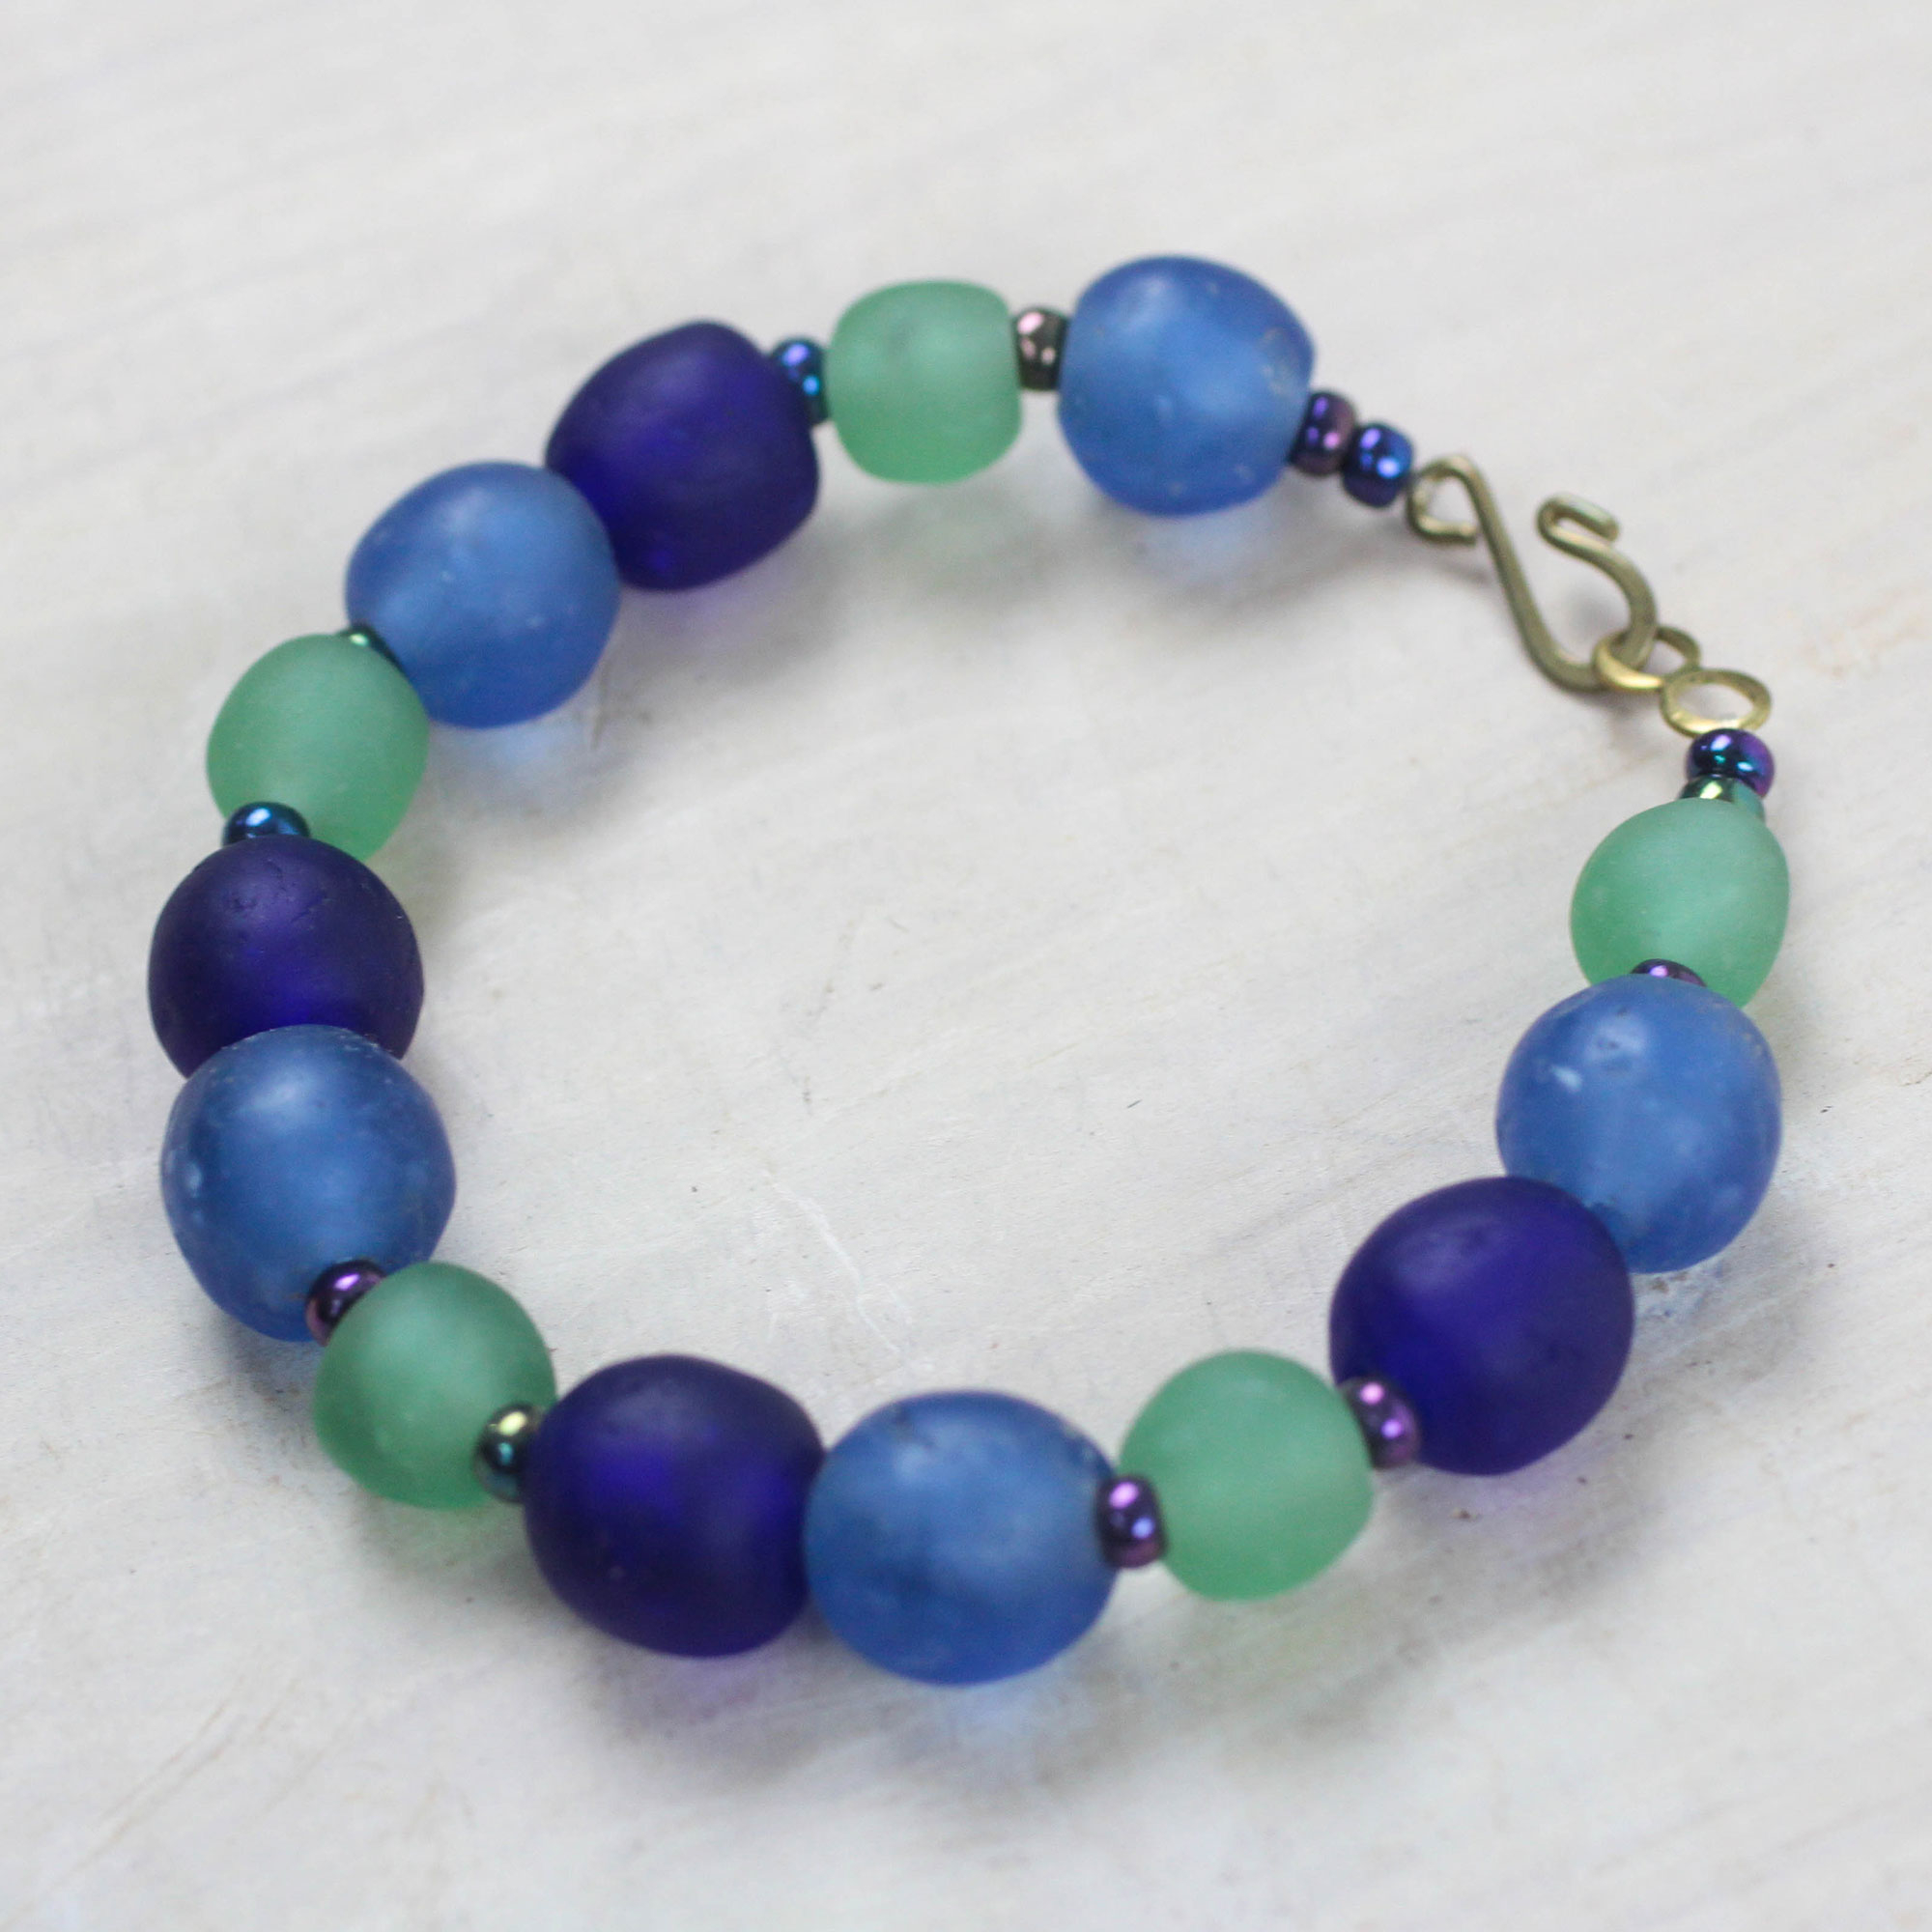 Blue Recycled Glass and Plastic Beaded Bracelet from Ghana - Blue ...